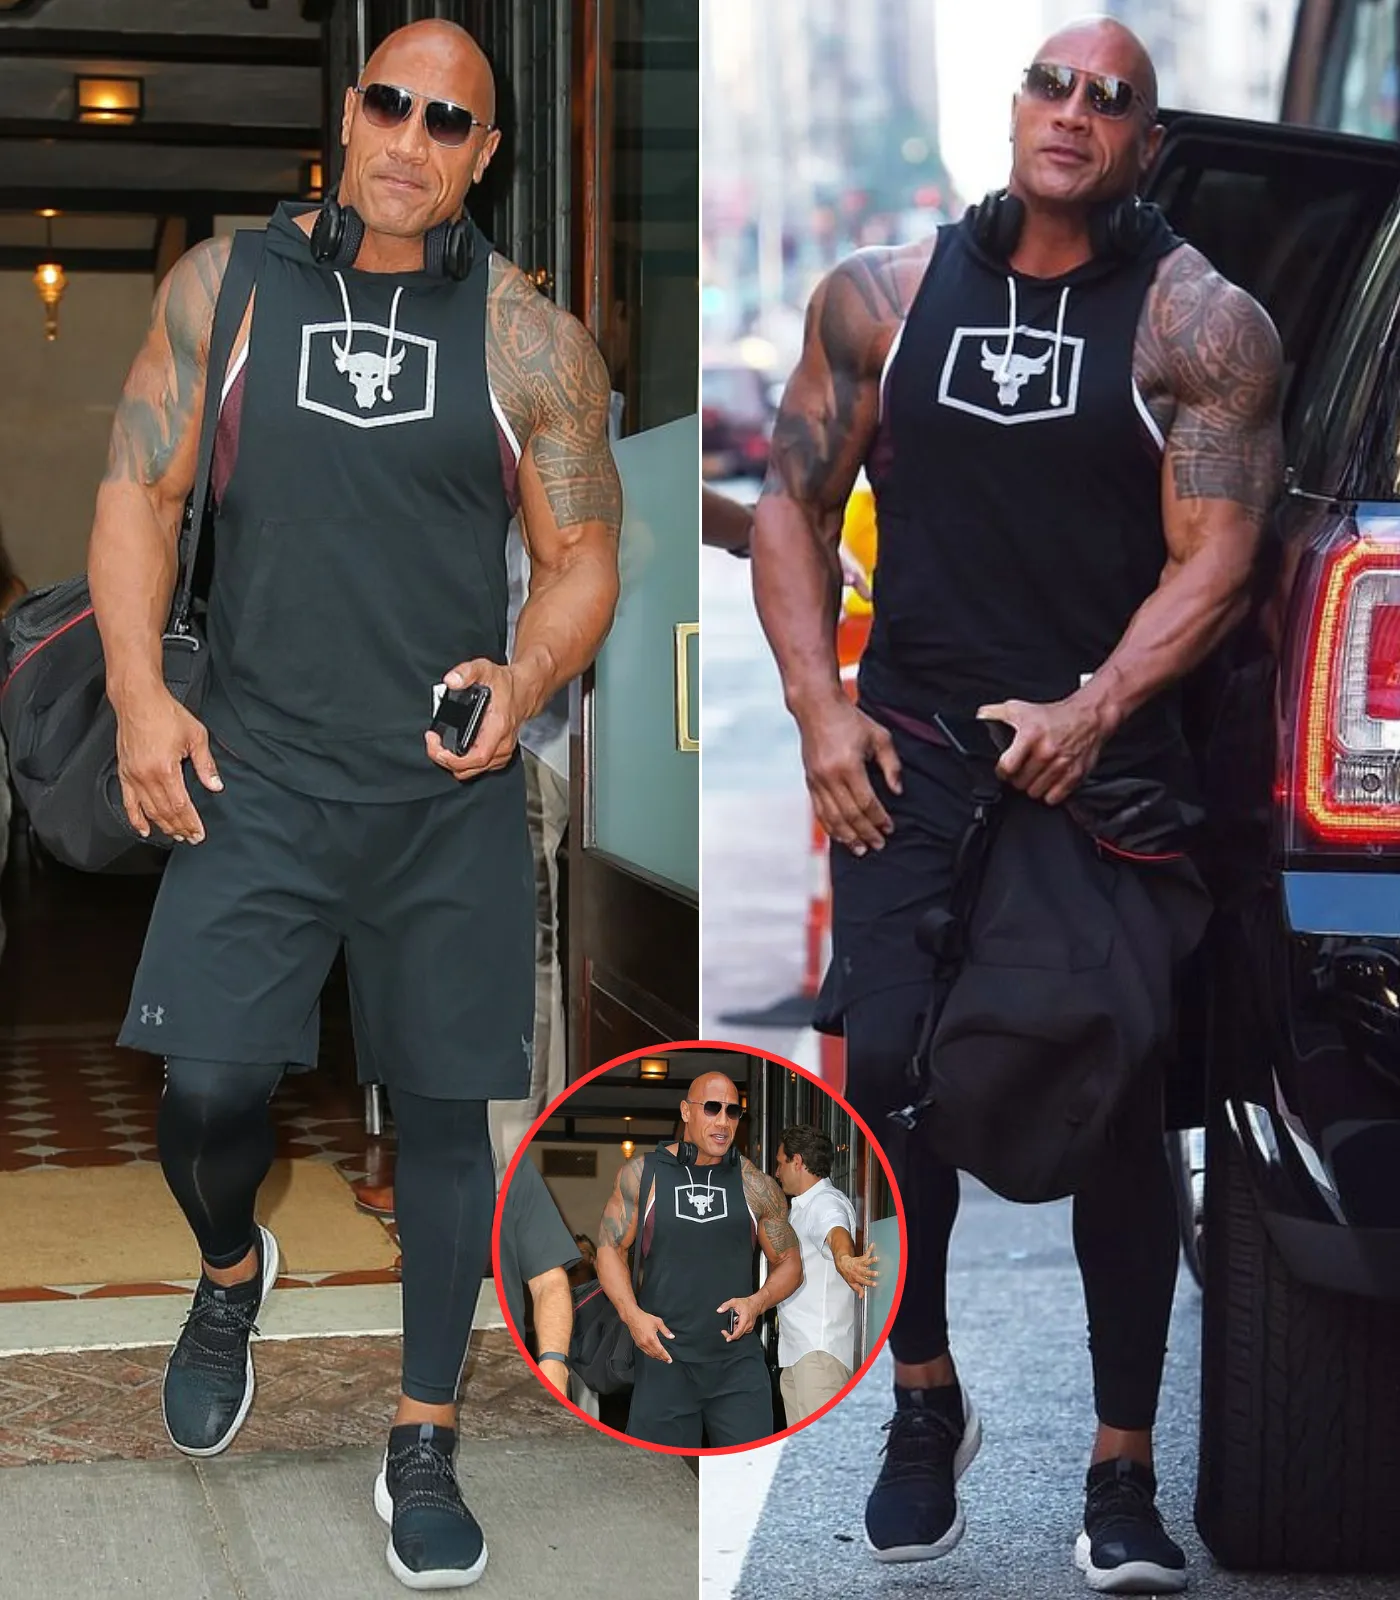 Dwayne Johnson puts his pumped-up physique on full display